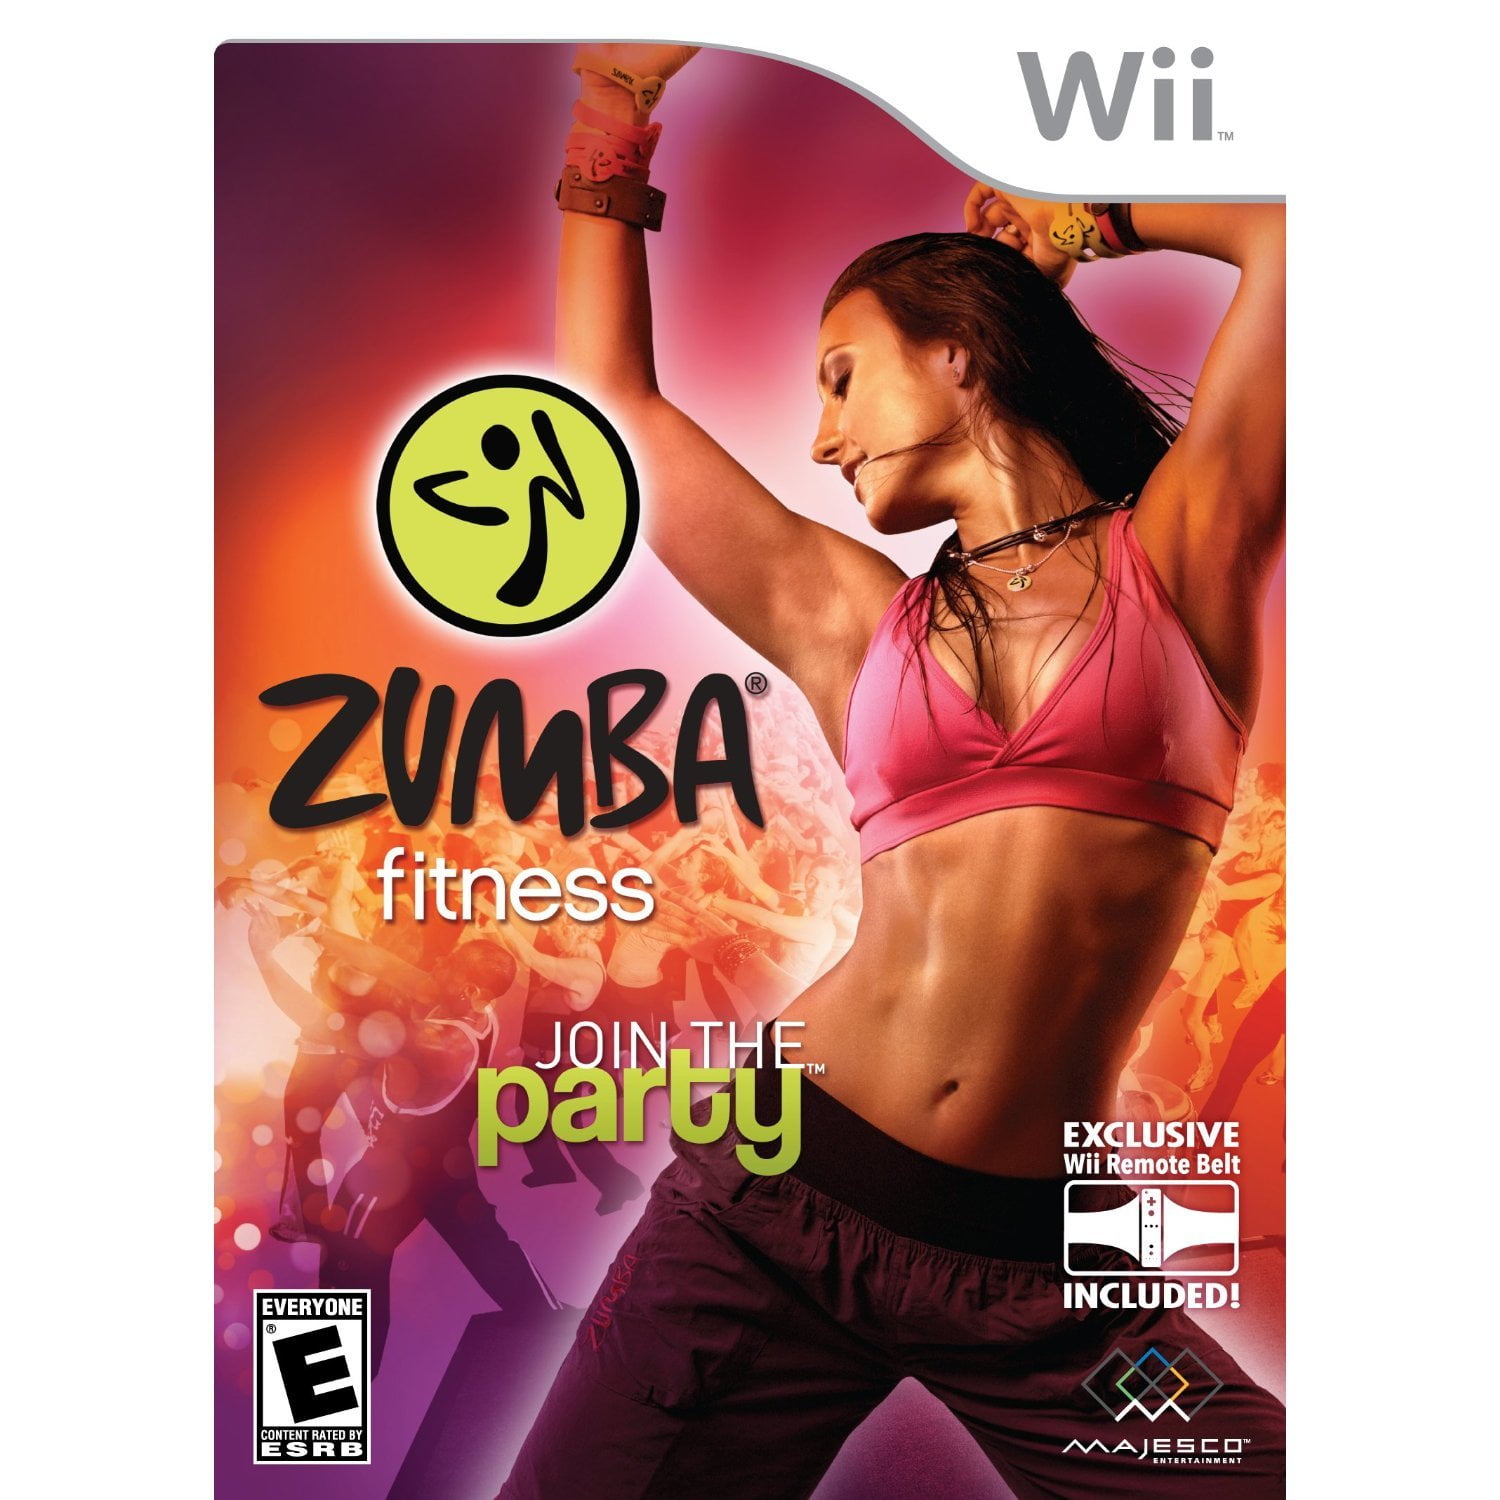 Zumba Fitness - Nintendo Wii, An exercise game and program for Wii that taps into the Zumba dance-exercise craze By Brand Majesco